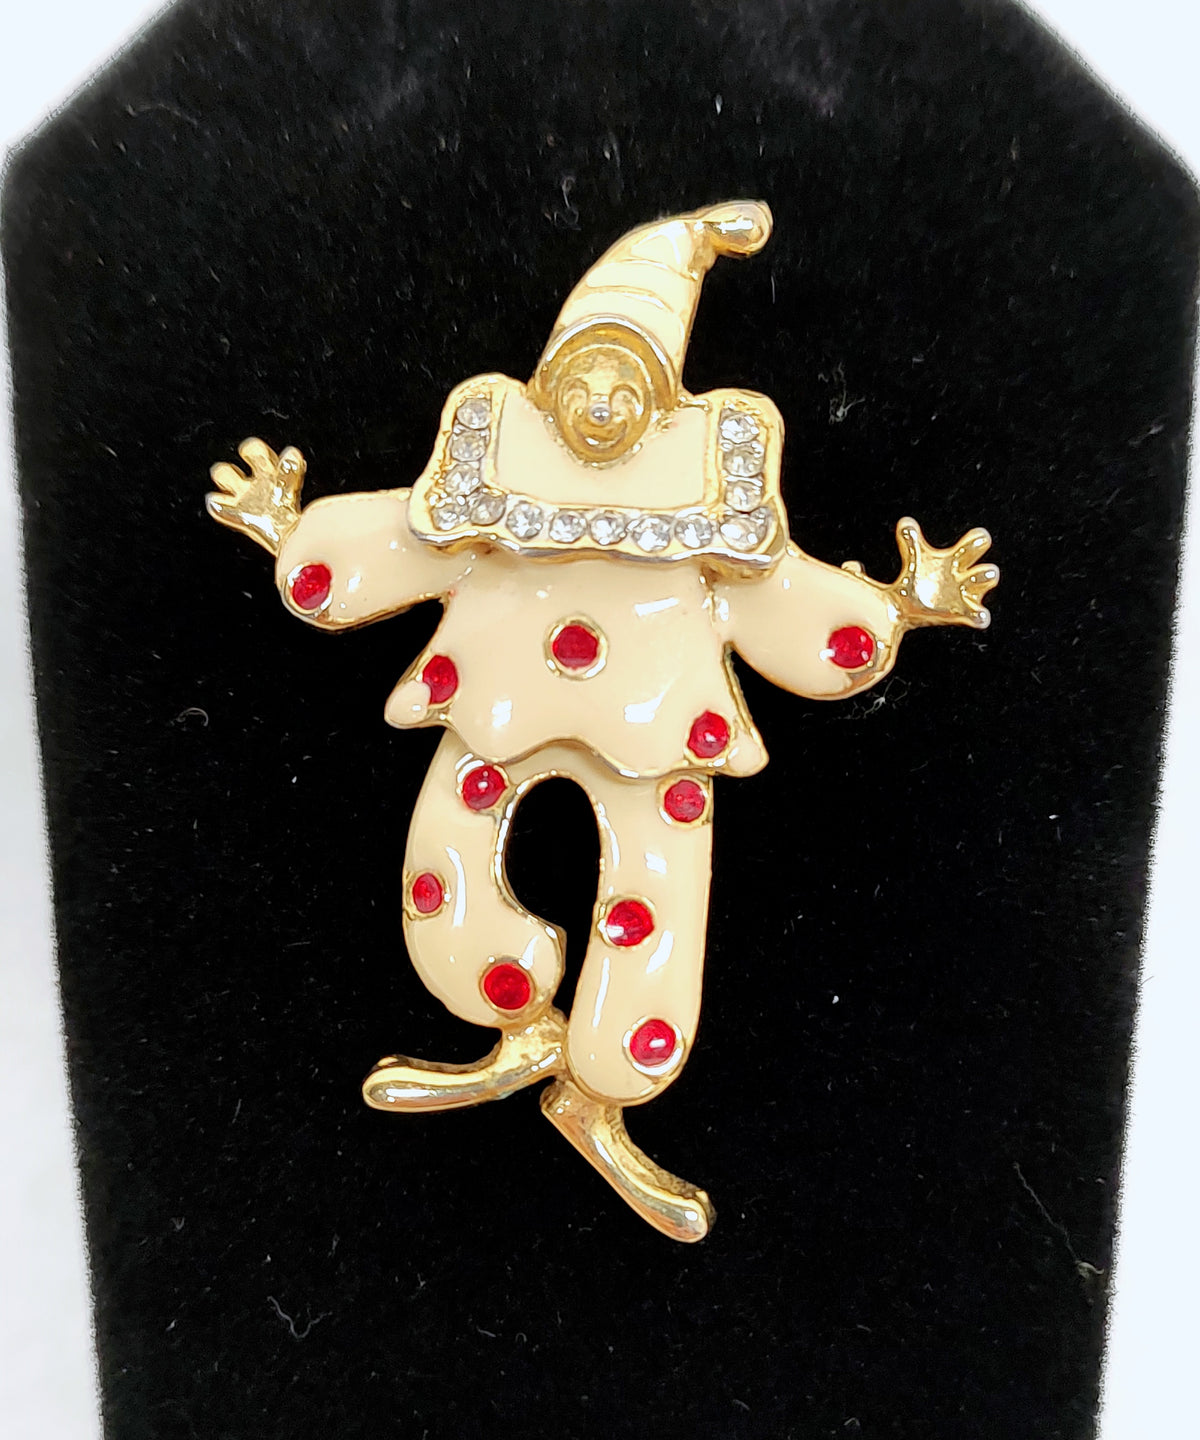 Vintage Articulated Dancing Clown Brooch Pin or Pendant - Hers and His Treasures